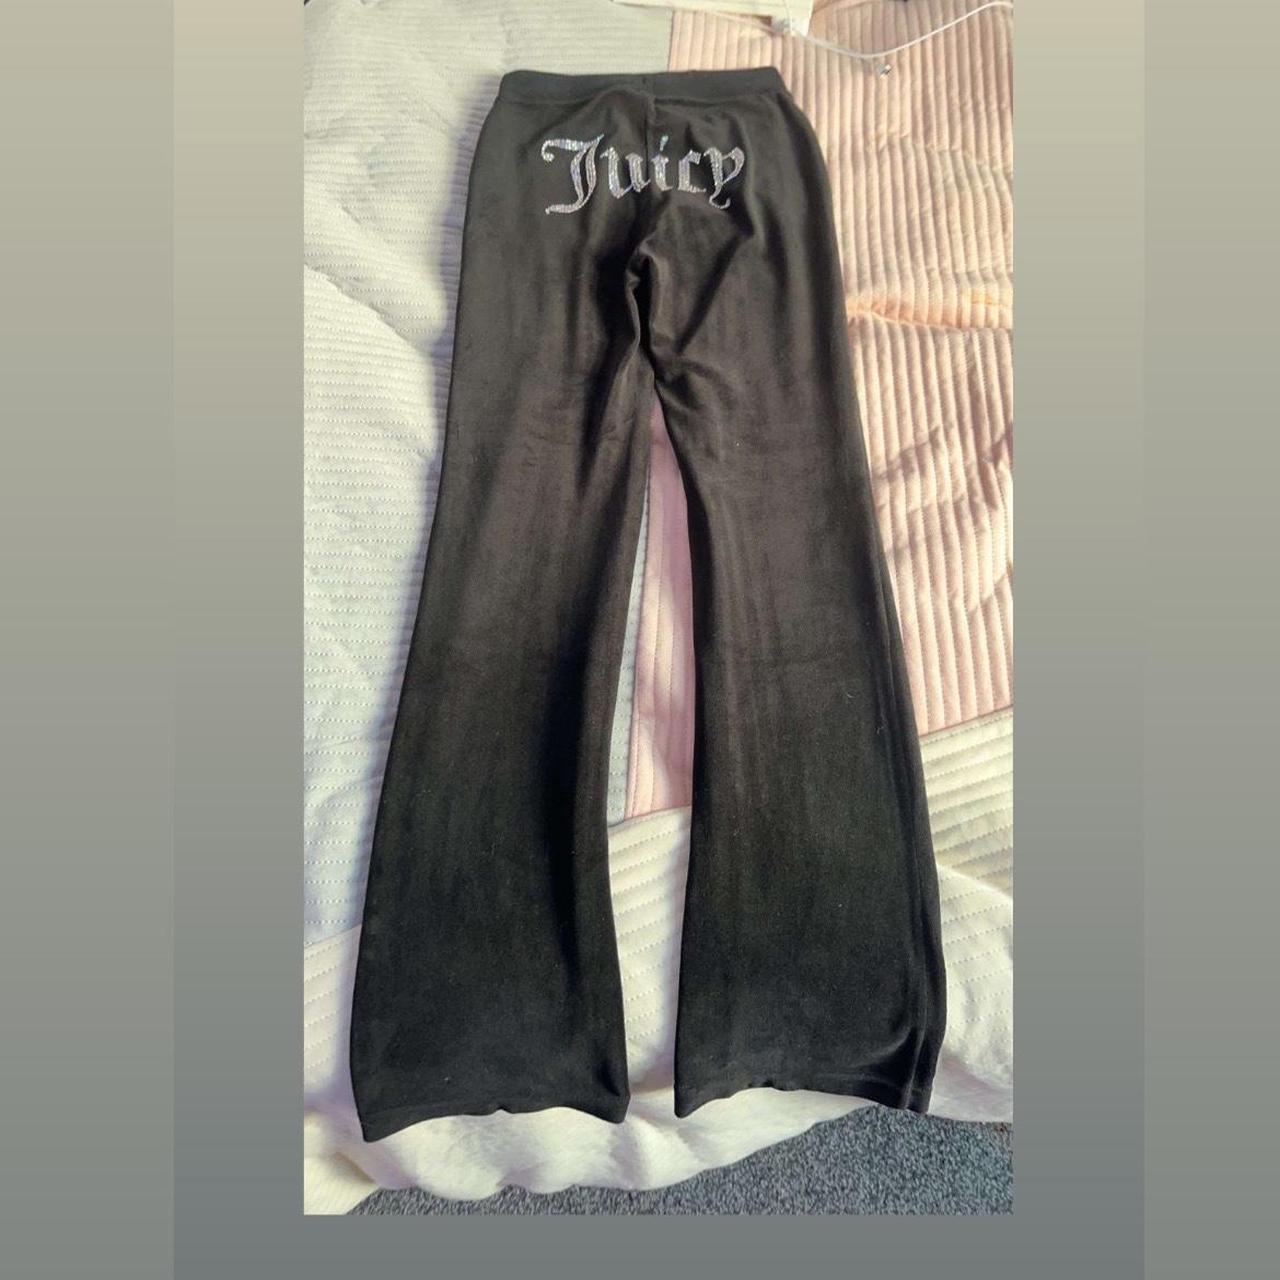 Juicy Couture Leggings -In Great Condition- Size - Depop